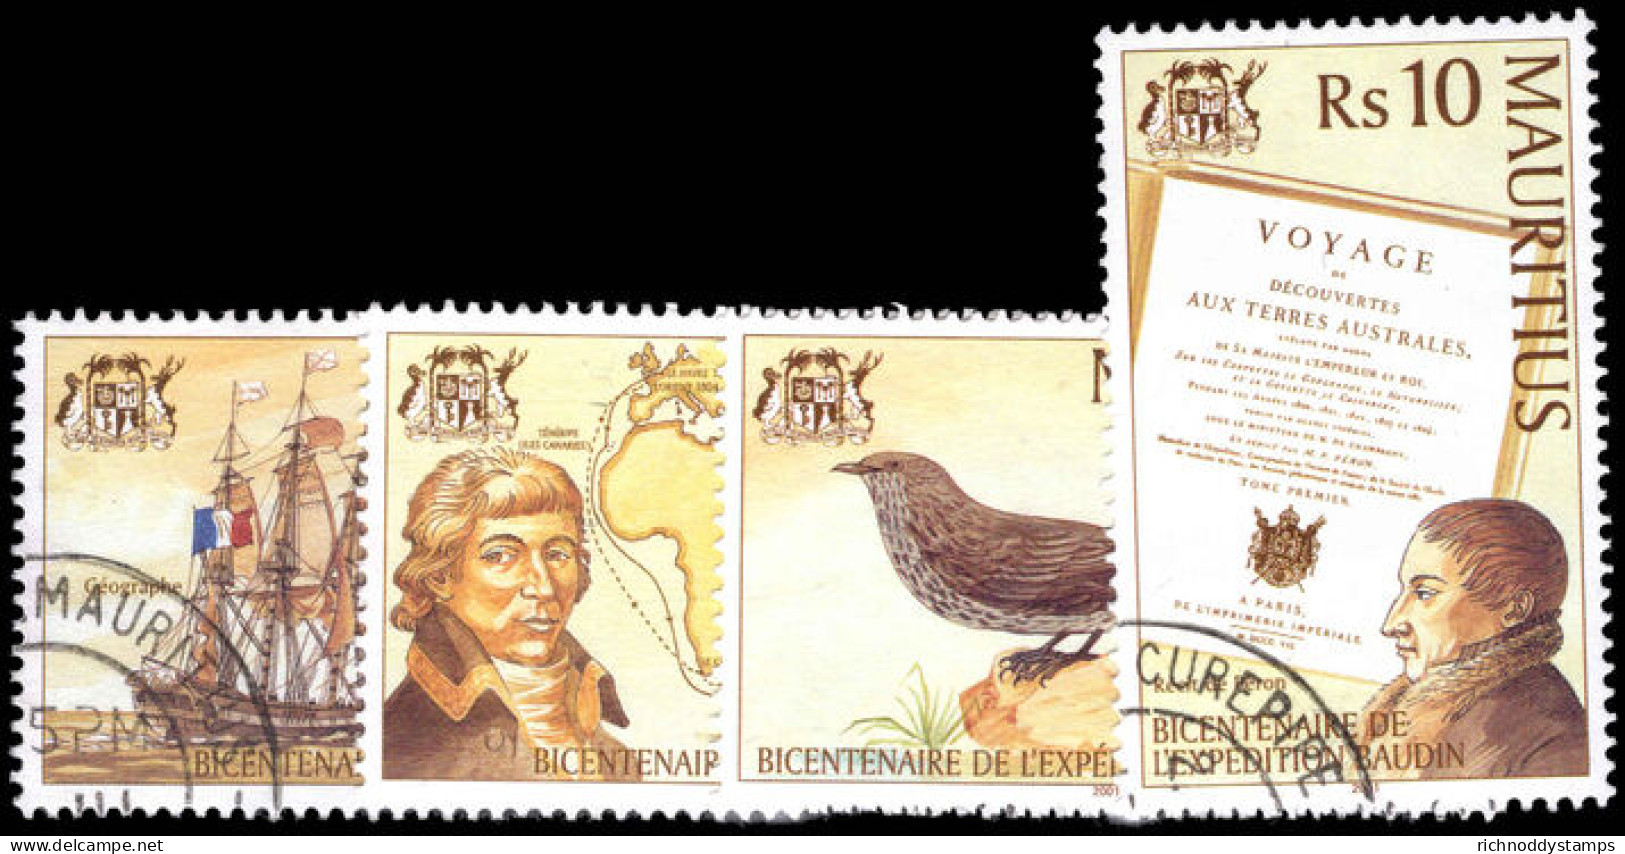 Mauritius 2001 Bicentenary Of Baudins Expedition To New Holland Fine Used. - Mauritius (1968-...)